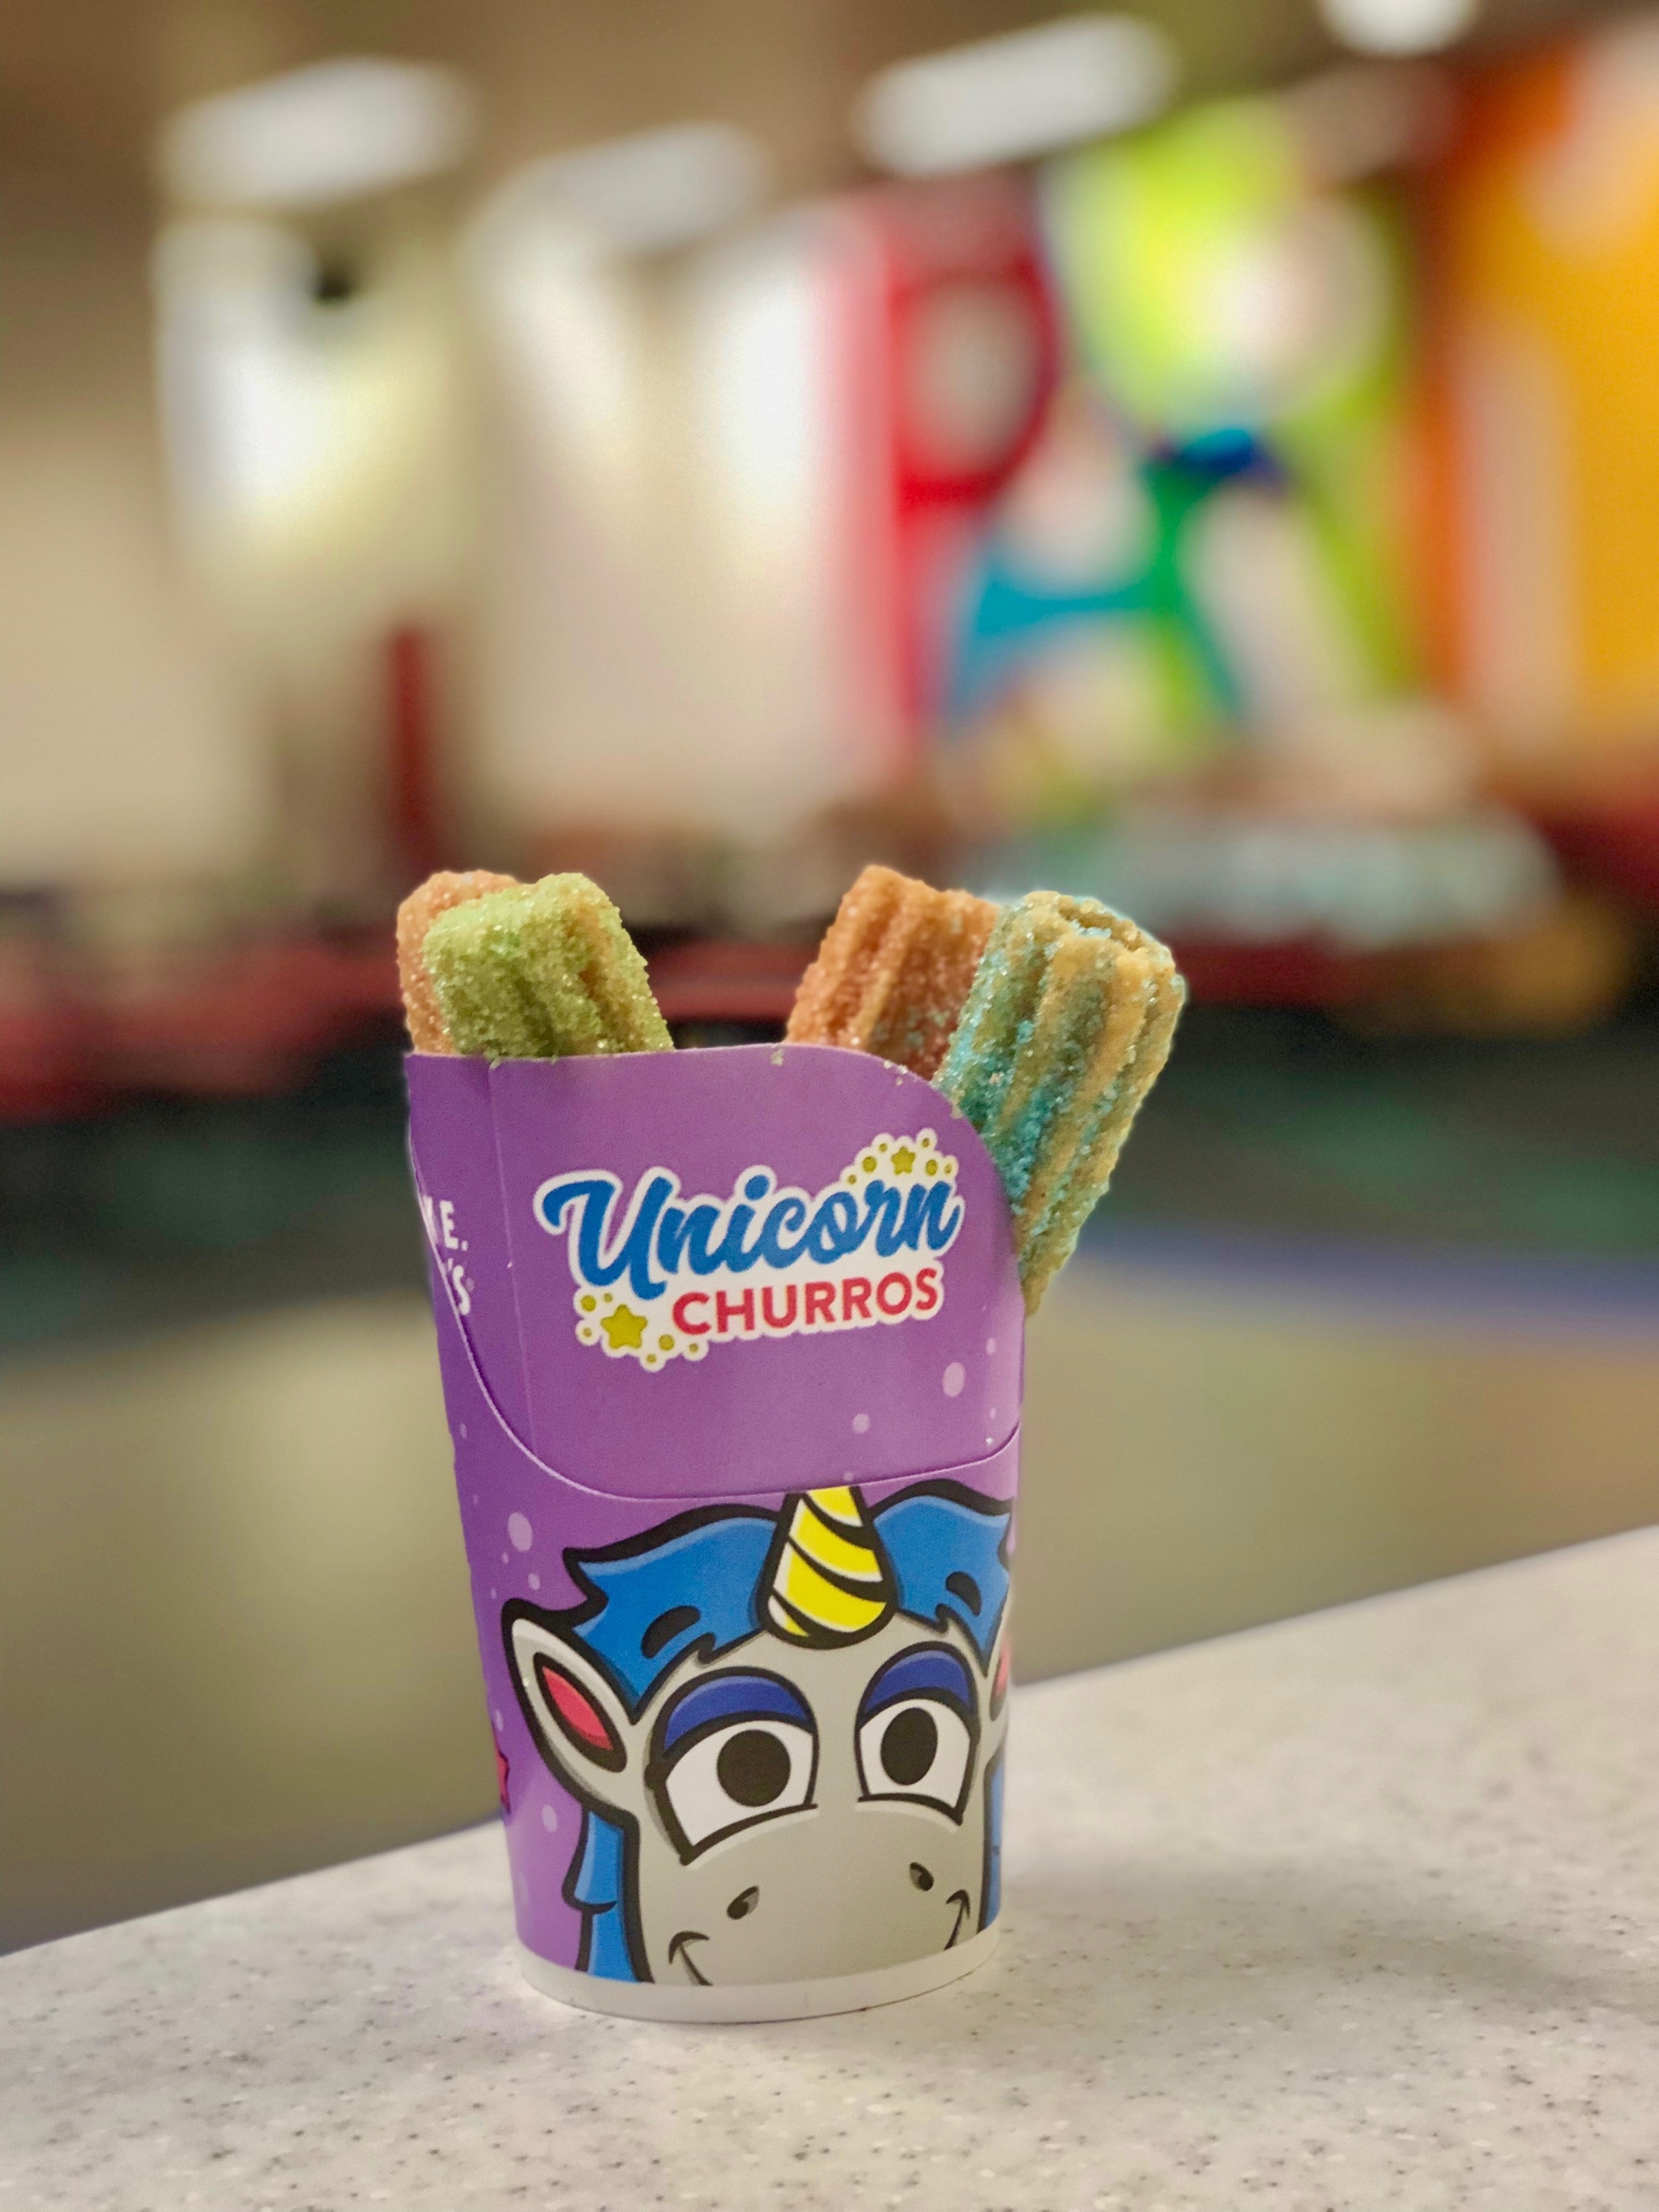 Remodeled Chuck E. Cheese Has Something for Everyone